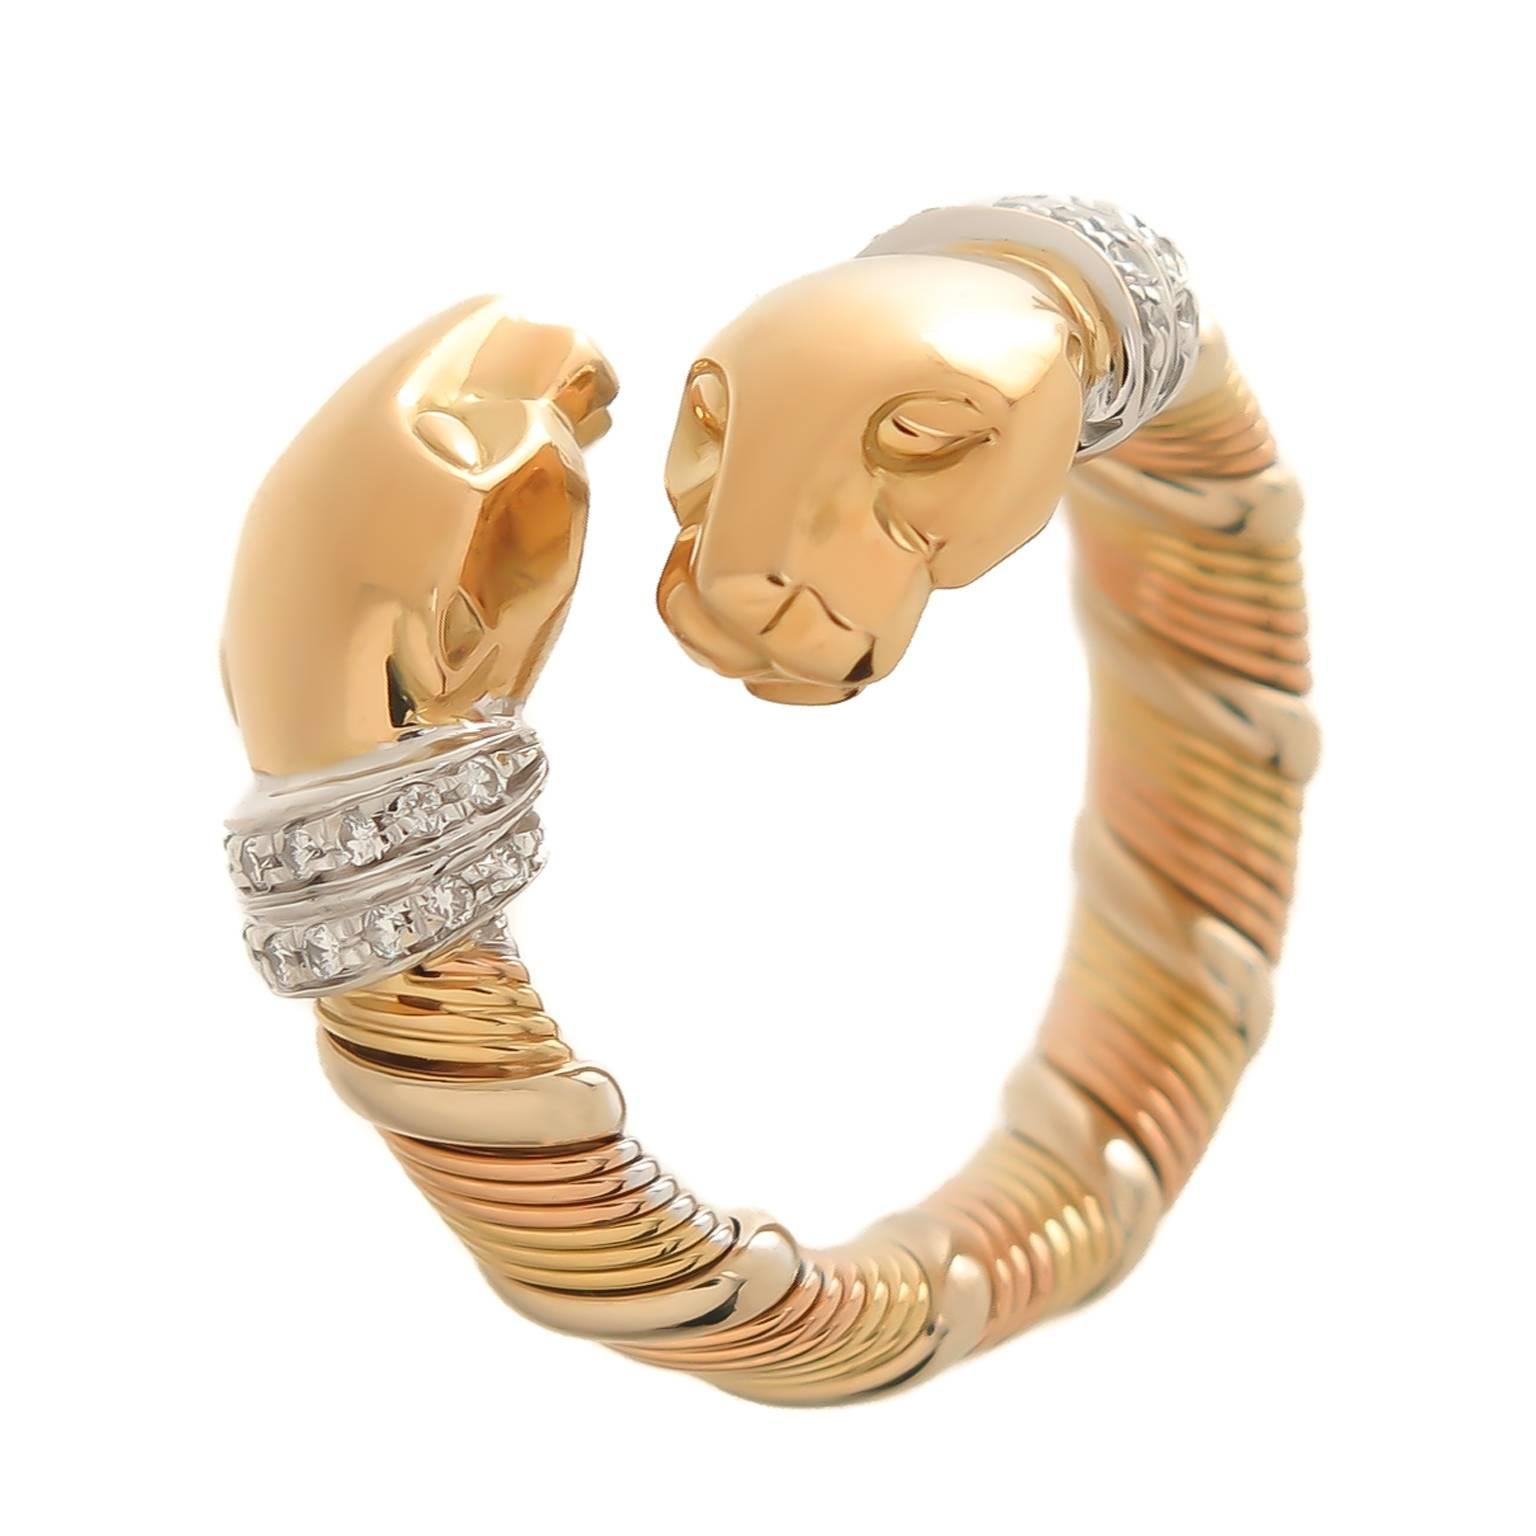 Circa 1990s Cartier 18K Yellow and White Gold Double Headed Panther Ring and further set with Diamonds in the Collars around the Panthers neck. Top measures 1 inch across. Finger size = 5 and will flex to 5 1/2.  Signed, numbered and having French